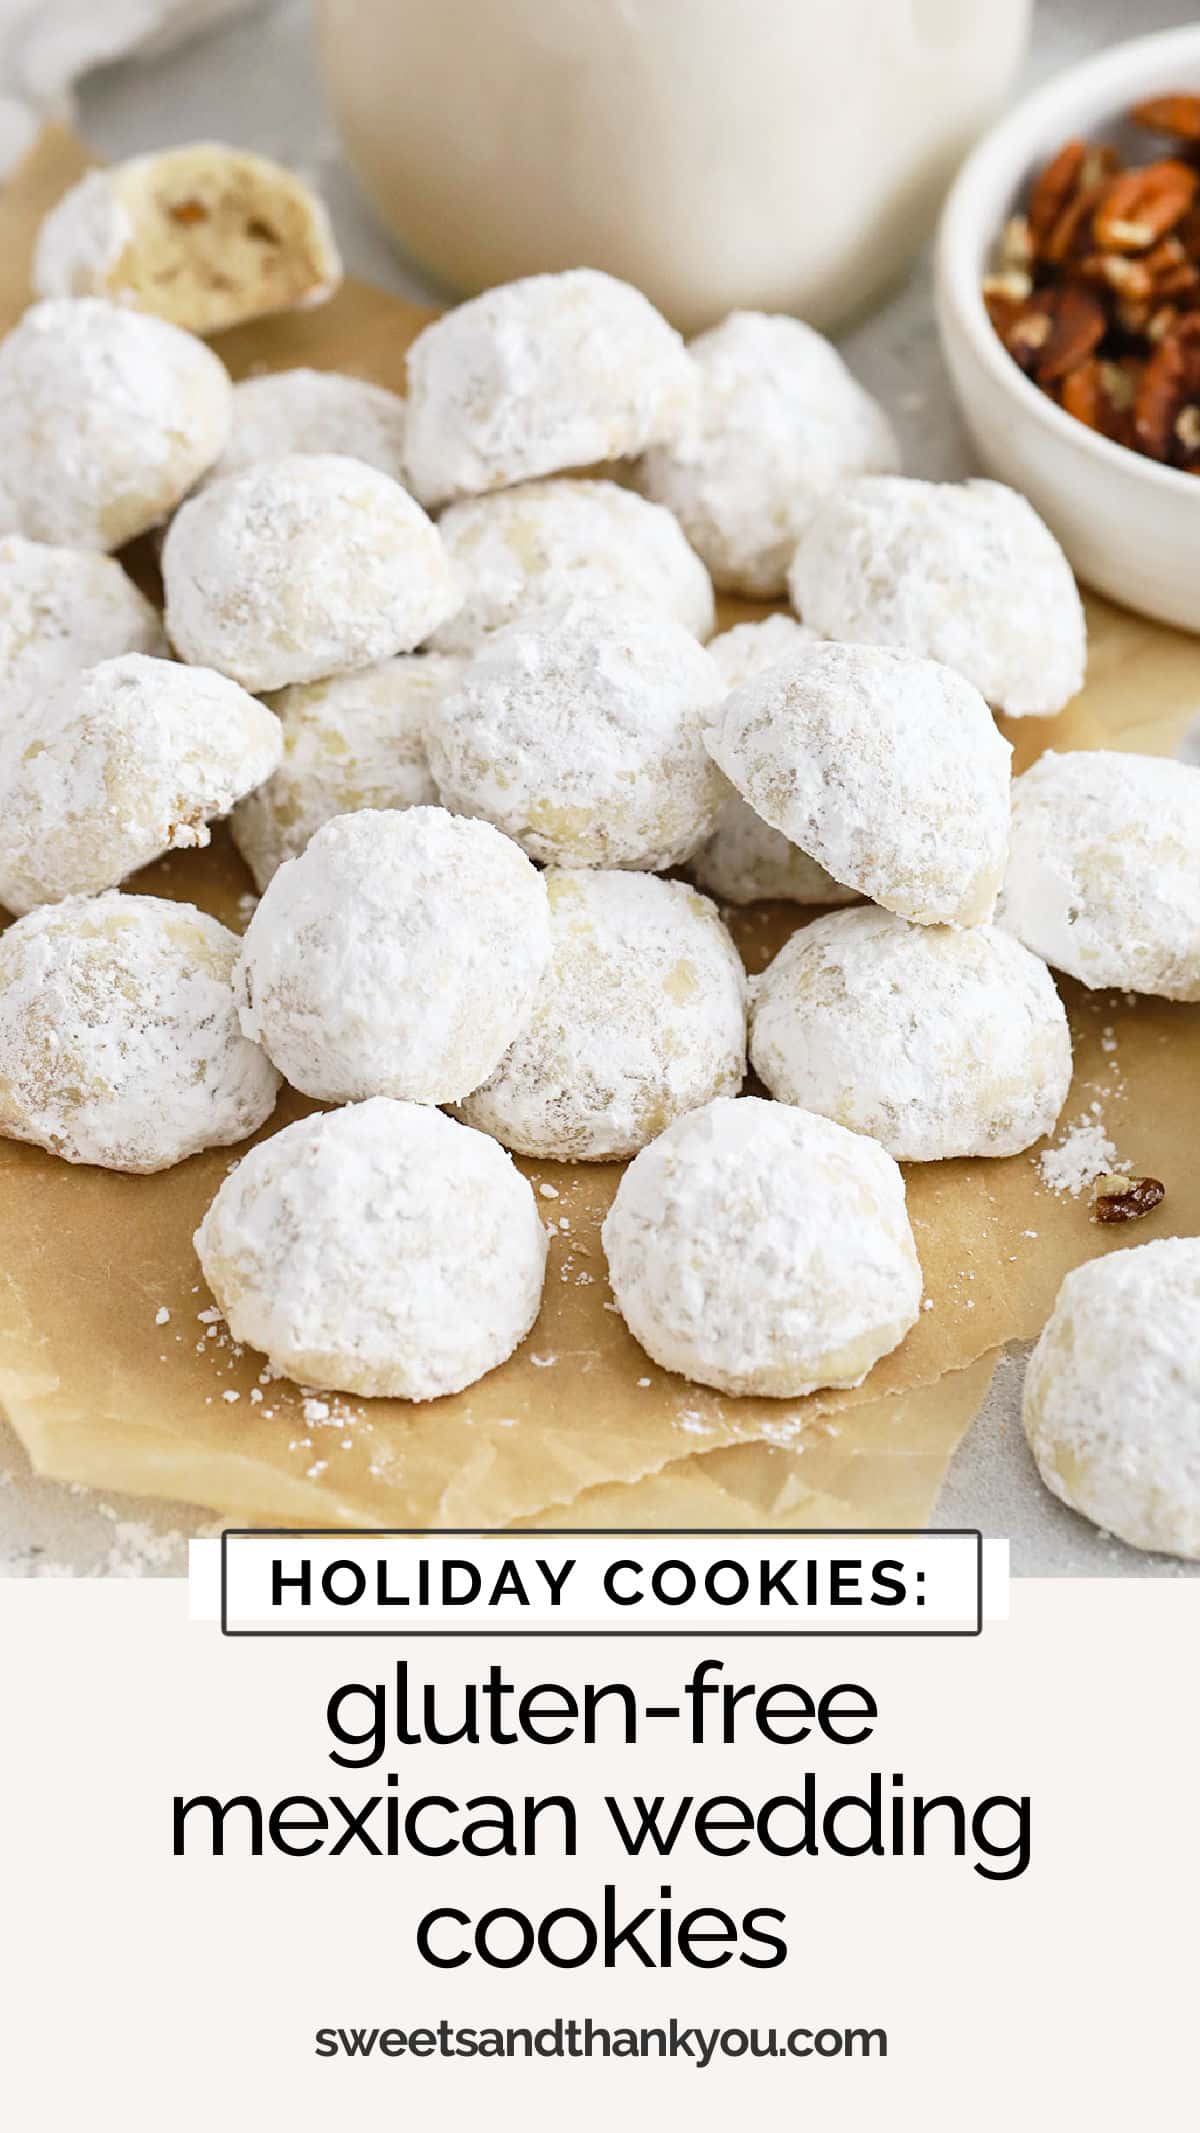 These gluten-free Mexican wedding cookies (aka gluten-free snowball cookies!) will absolutely melt in your mouth. With their delicate texture & delicious flavor, they're a perfect gluten-free holiday cookie recipe! Add them to a gluten-free holiday cookie plate or for a gluten-free cookie exchange. They're always a hit! 